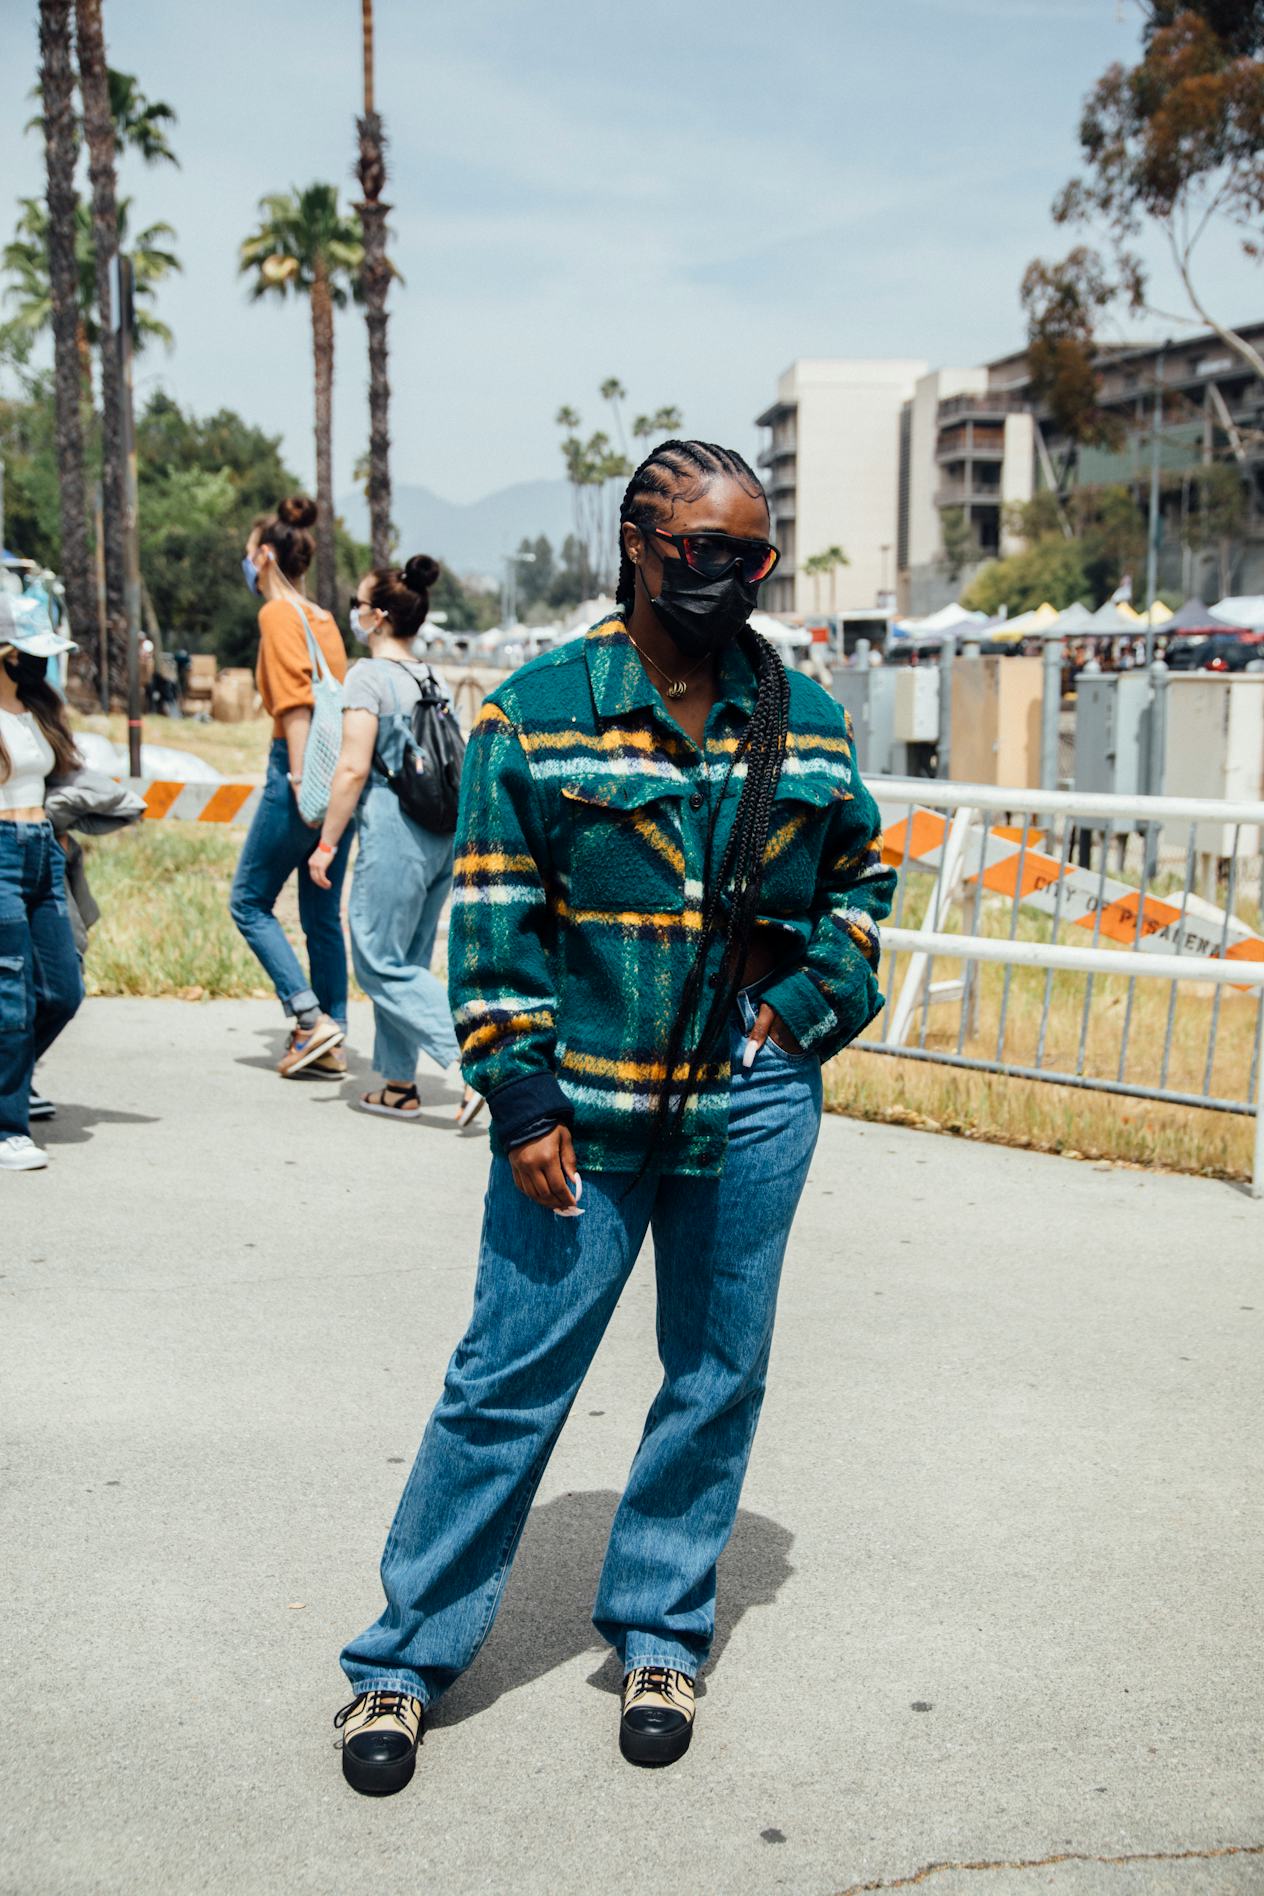 The Rose Bowl Flea Market's 2021 Reopening Brought The Best Street Style